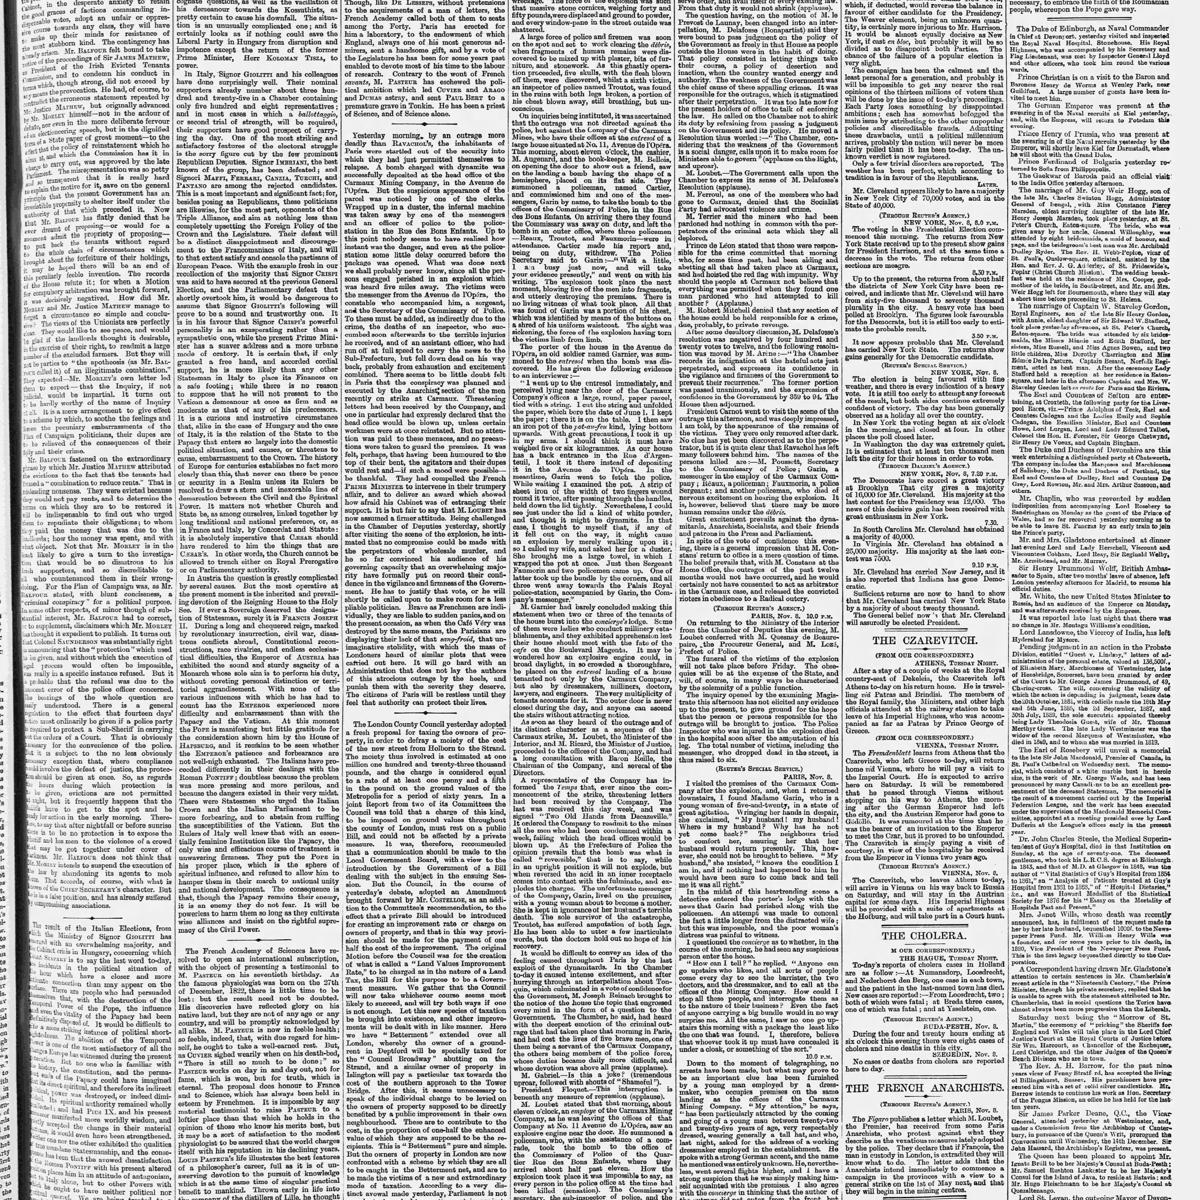 The Standard, 1892-11-09, page 5